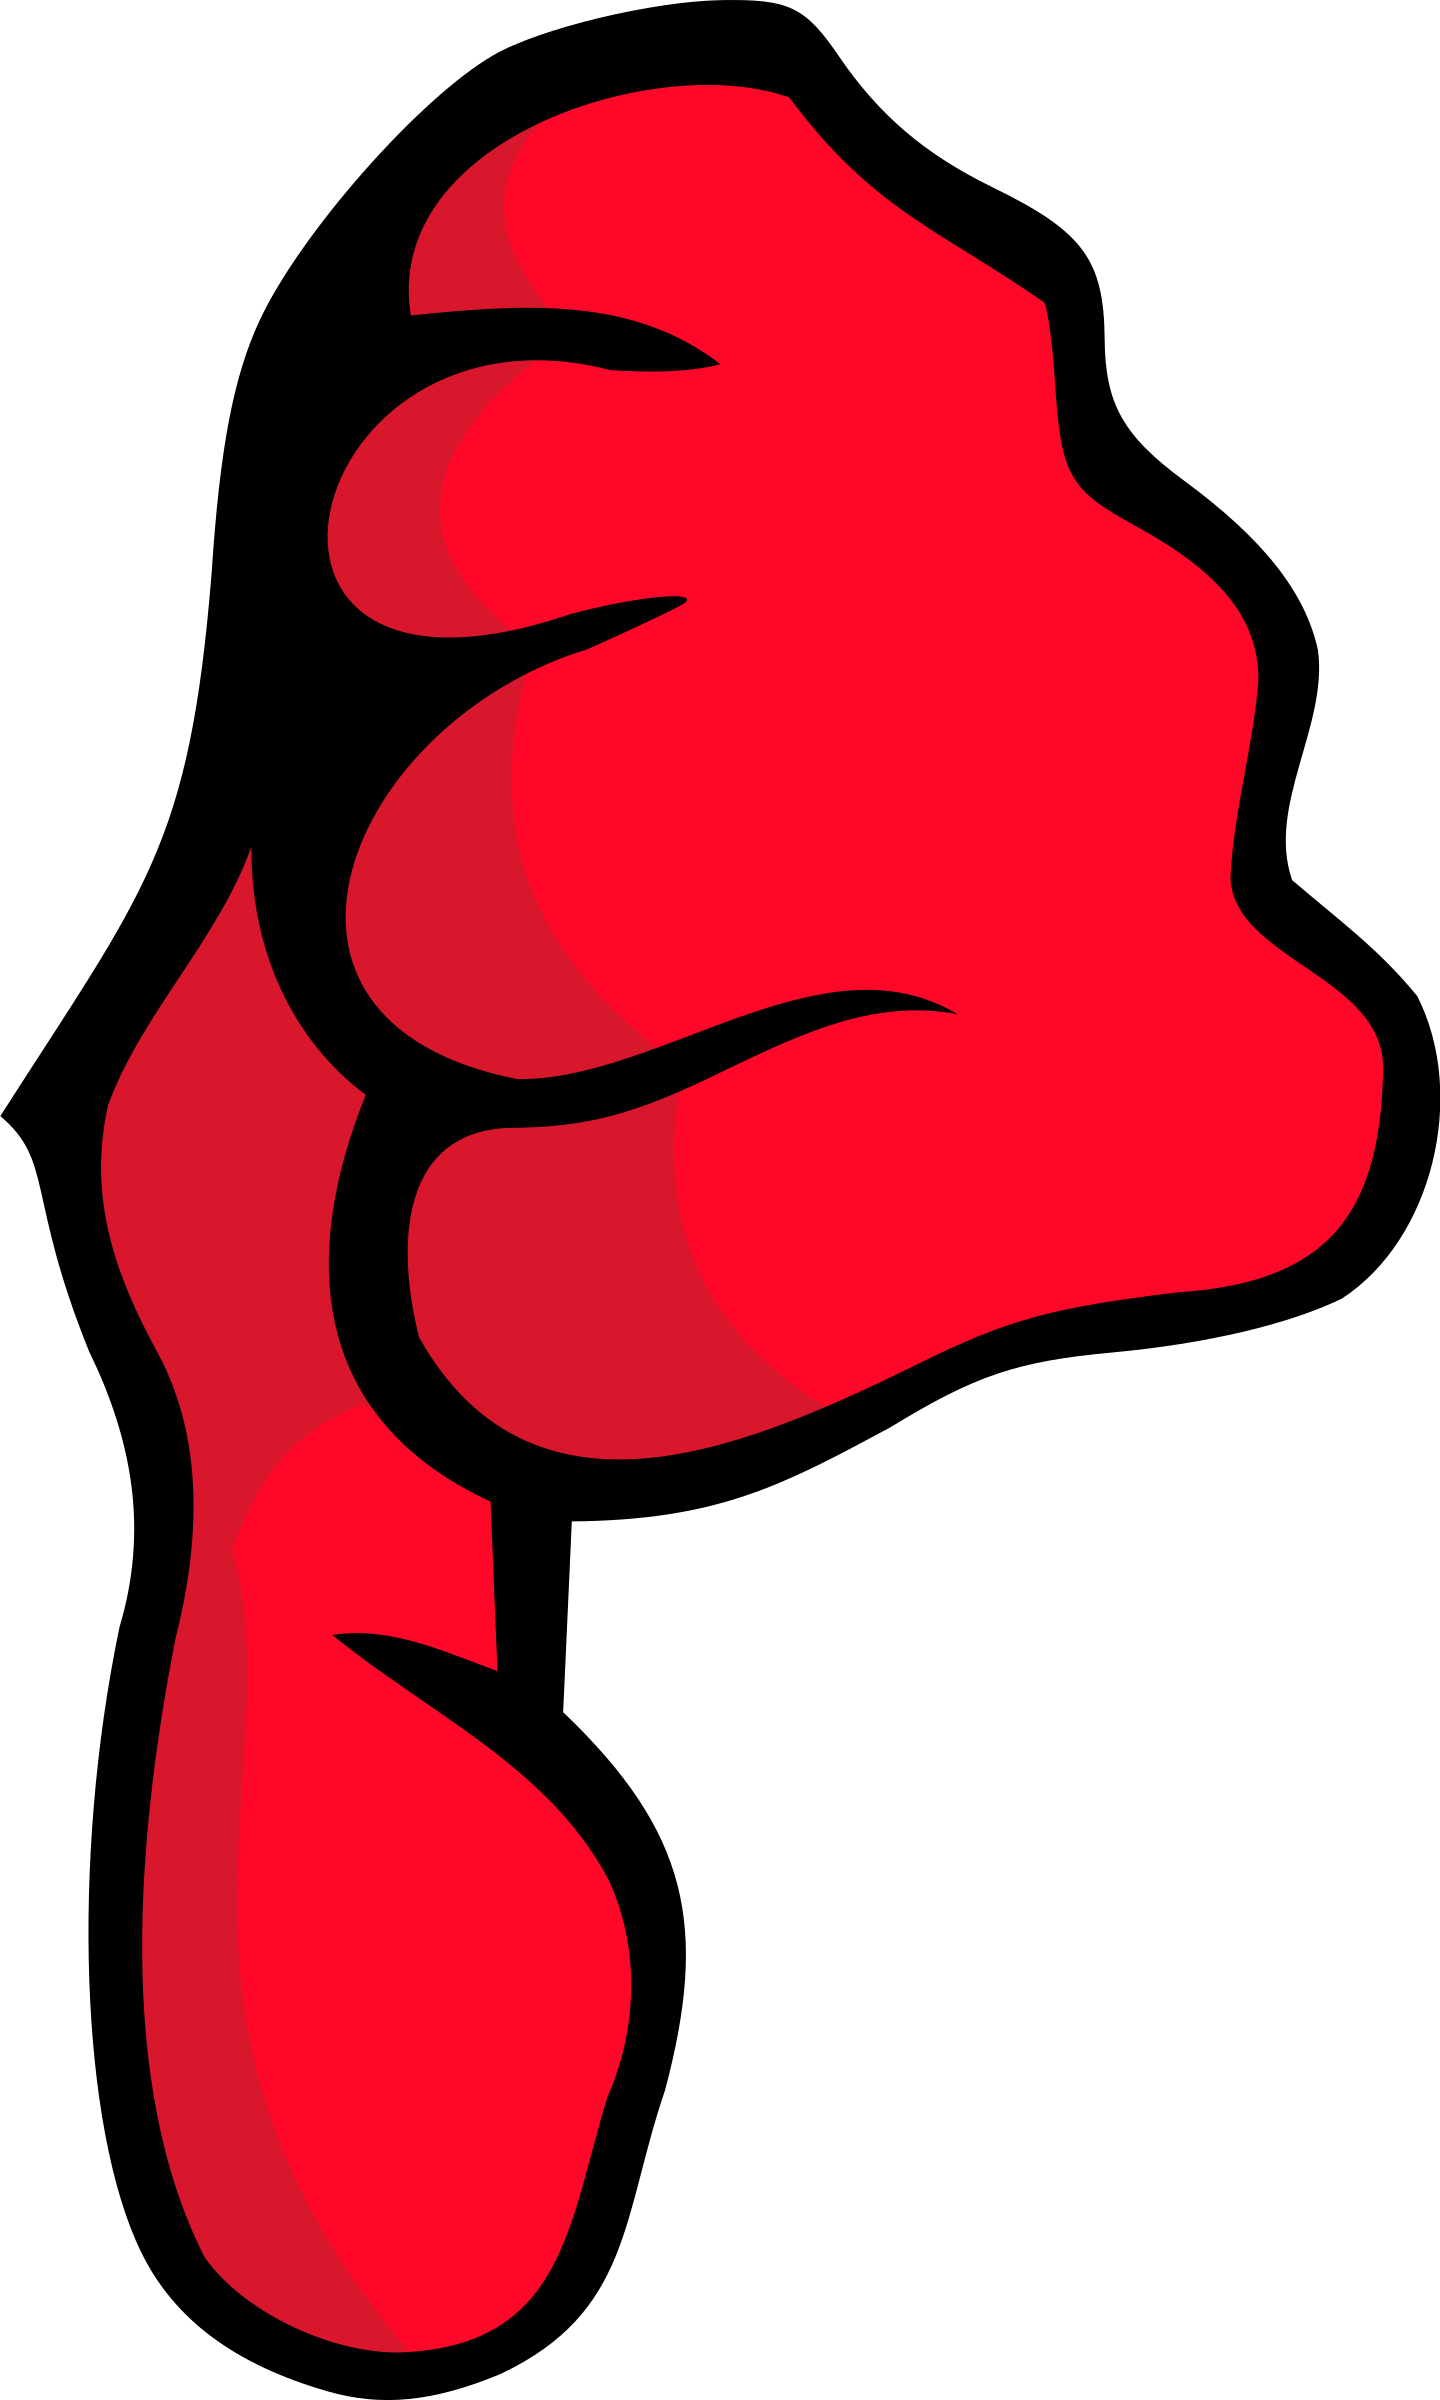 Big Image - Red Thumbs Down Png (1440x2400)